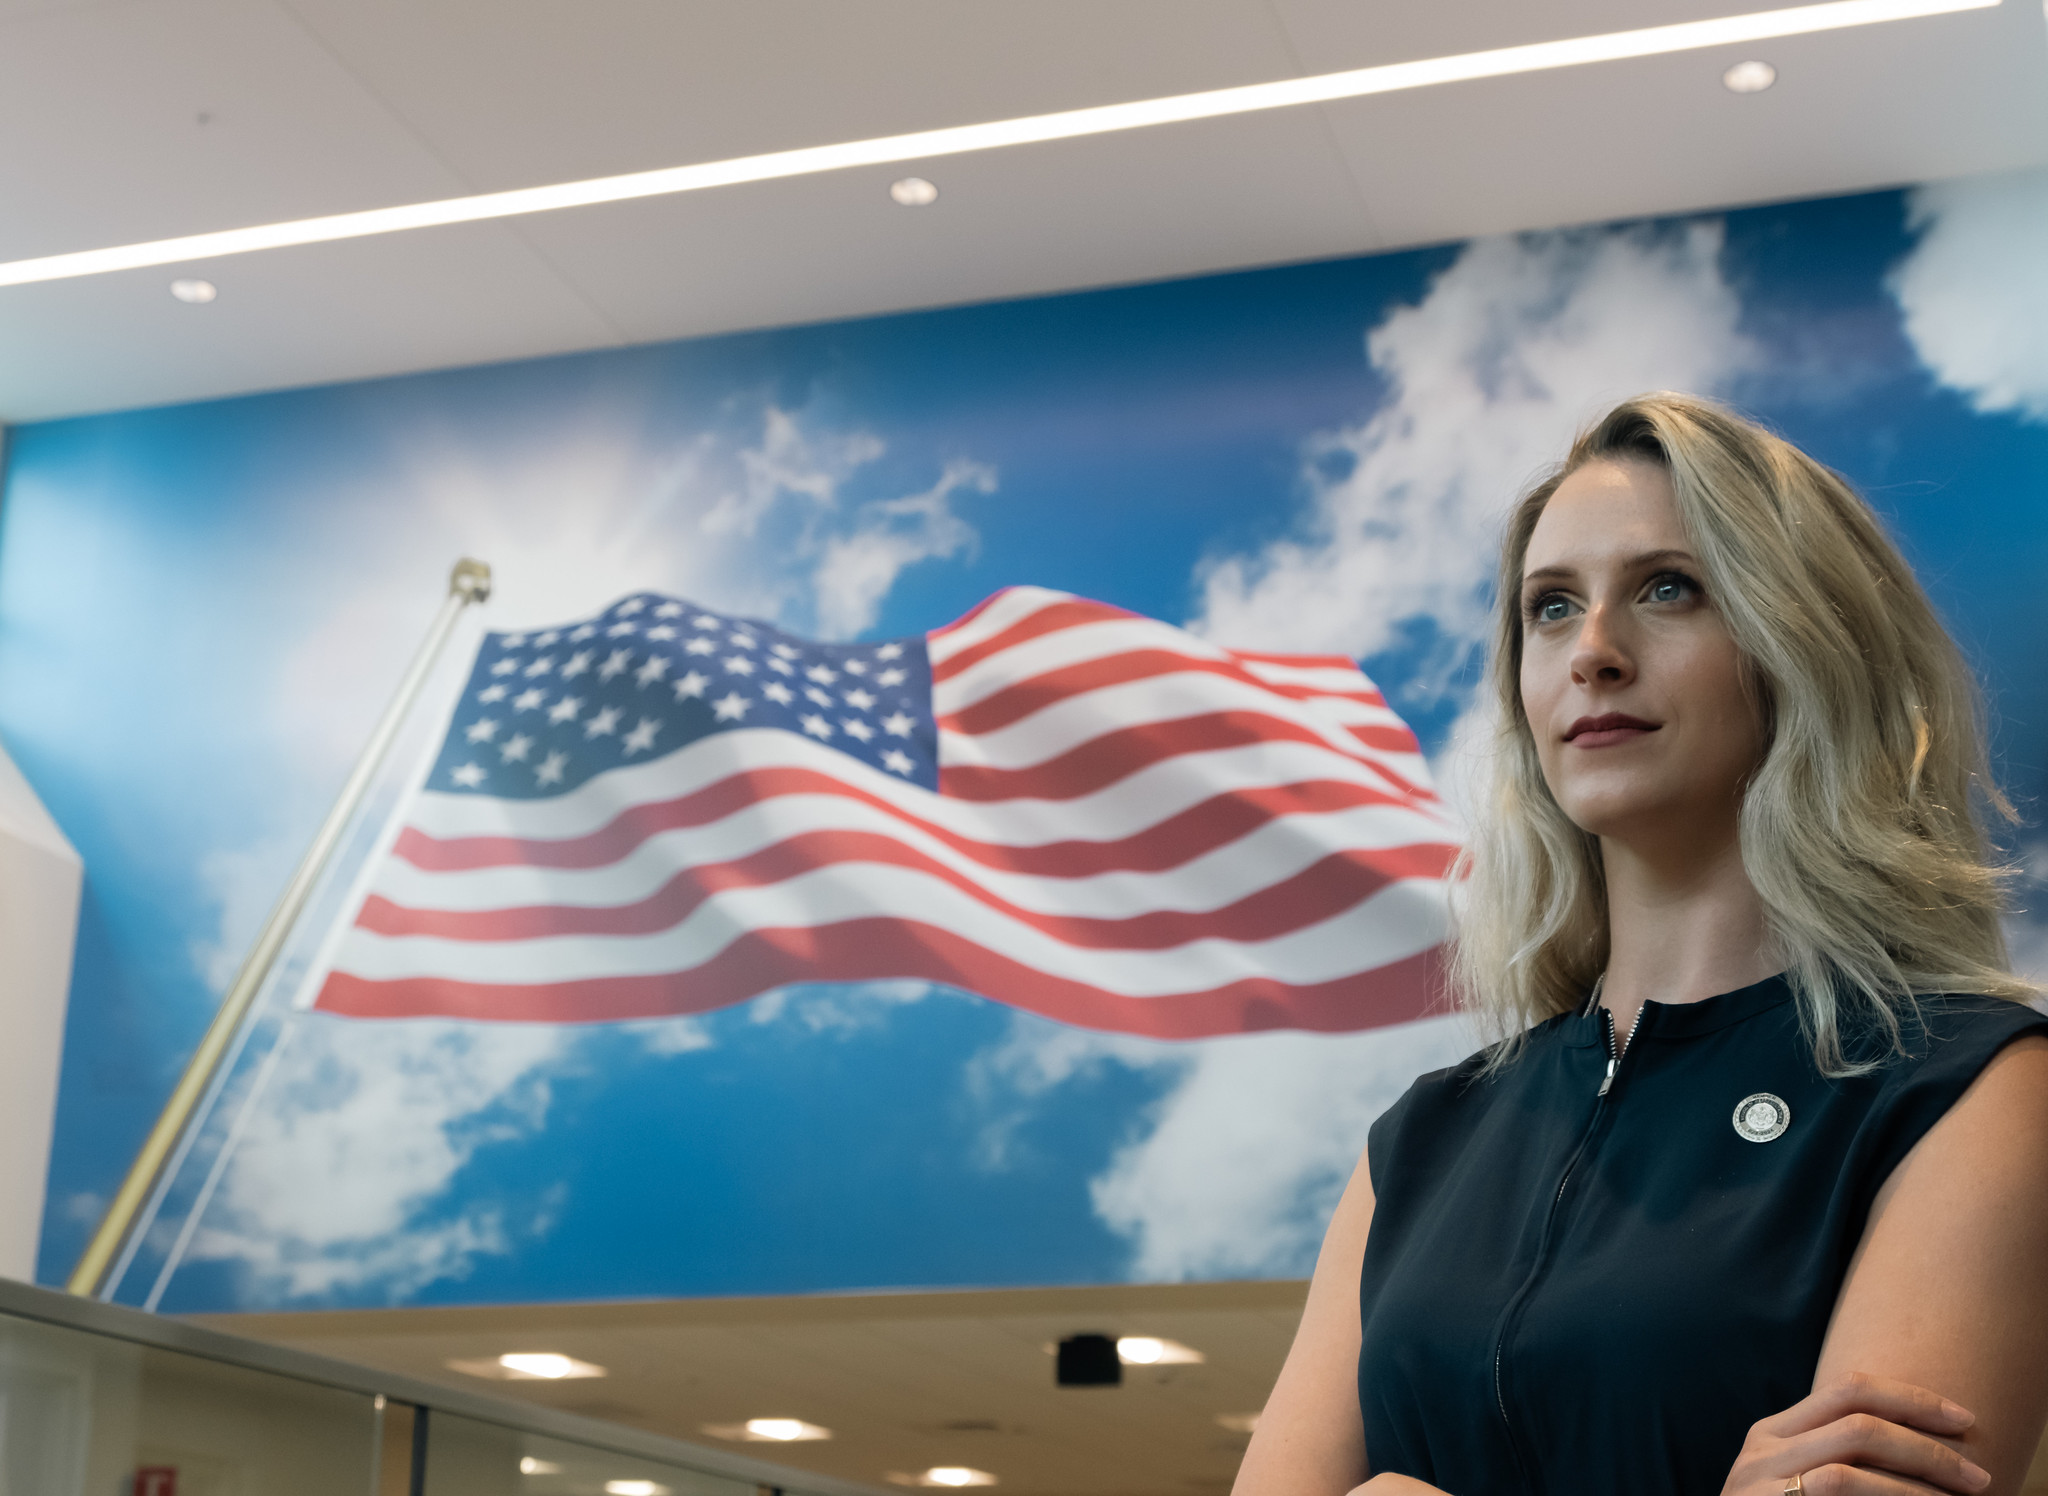 VA Staff member standing in front of a mural that feature the flag of the United States of America.